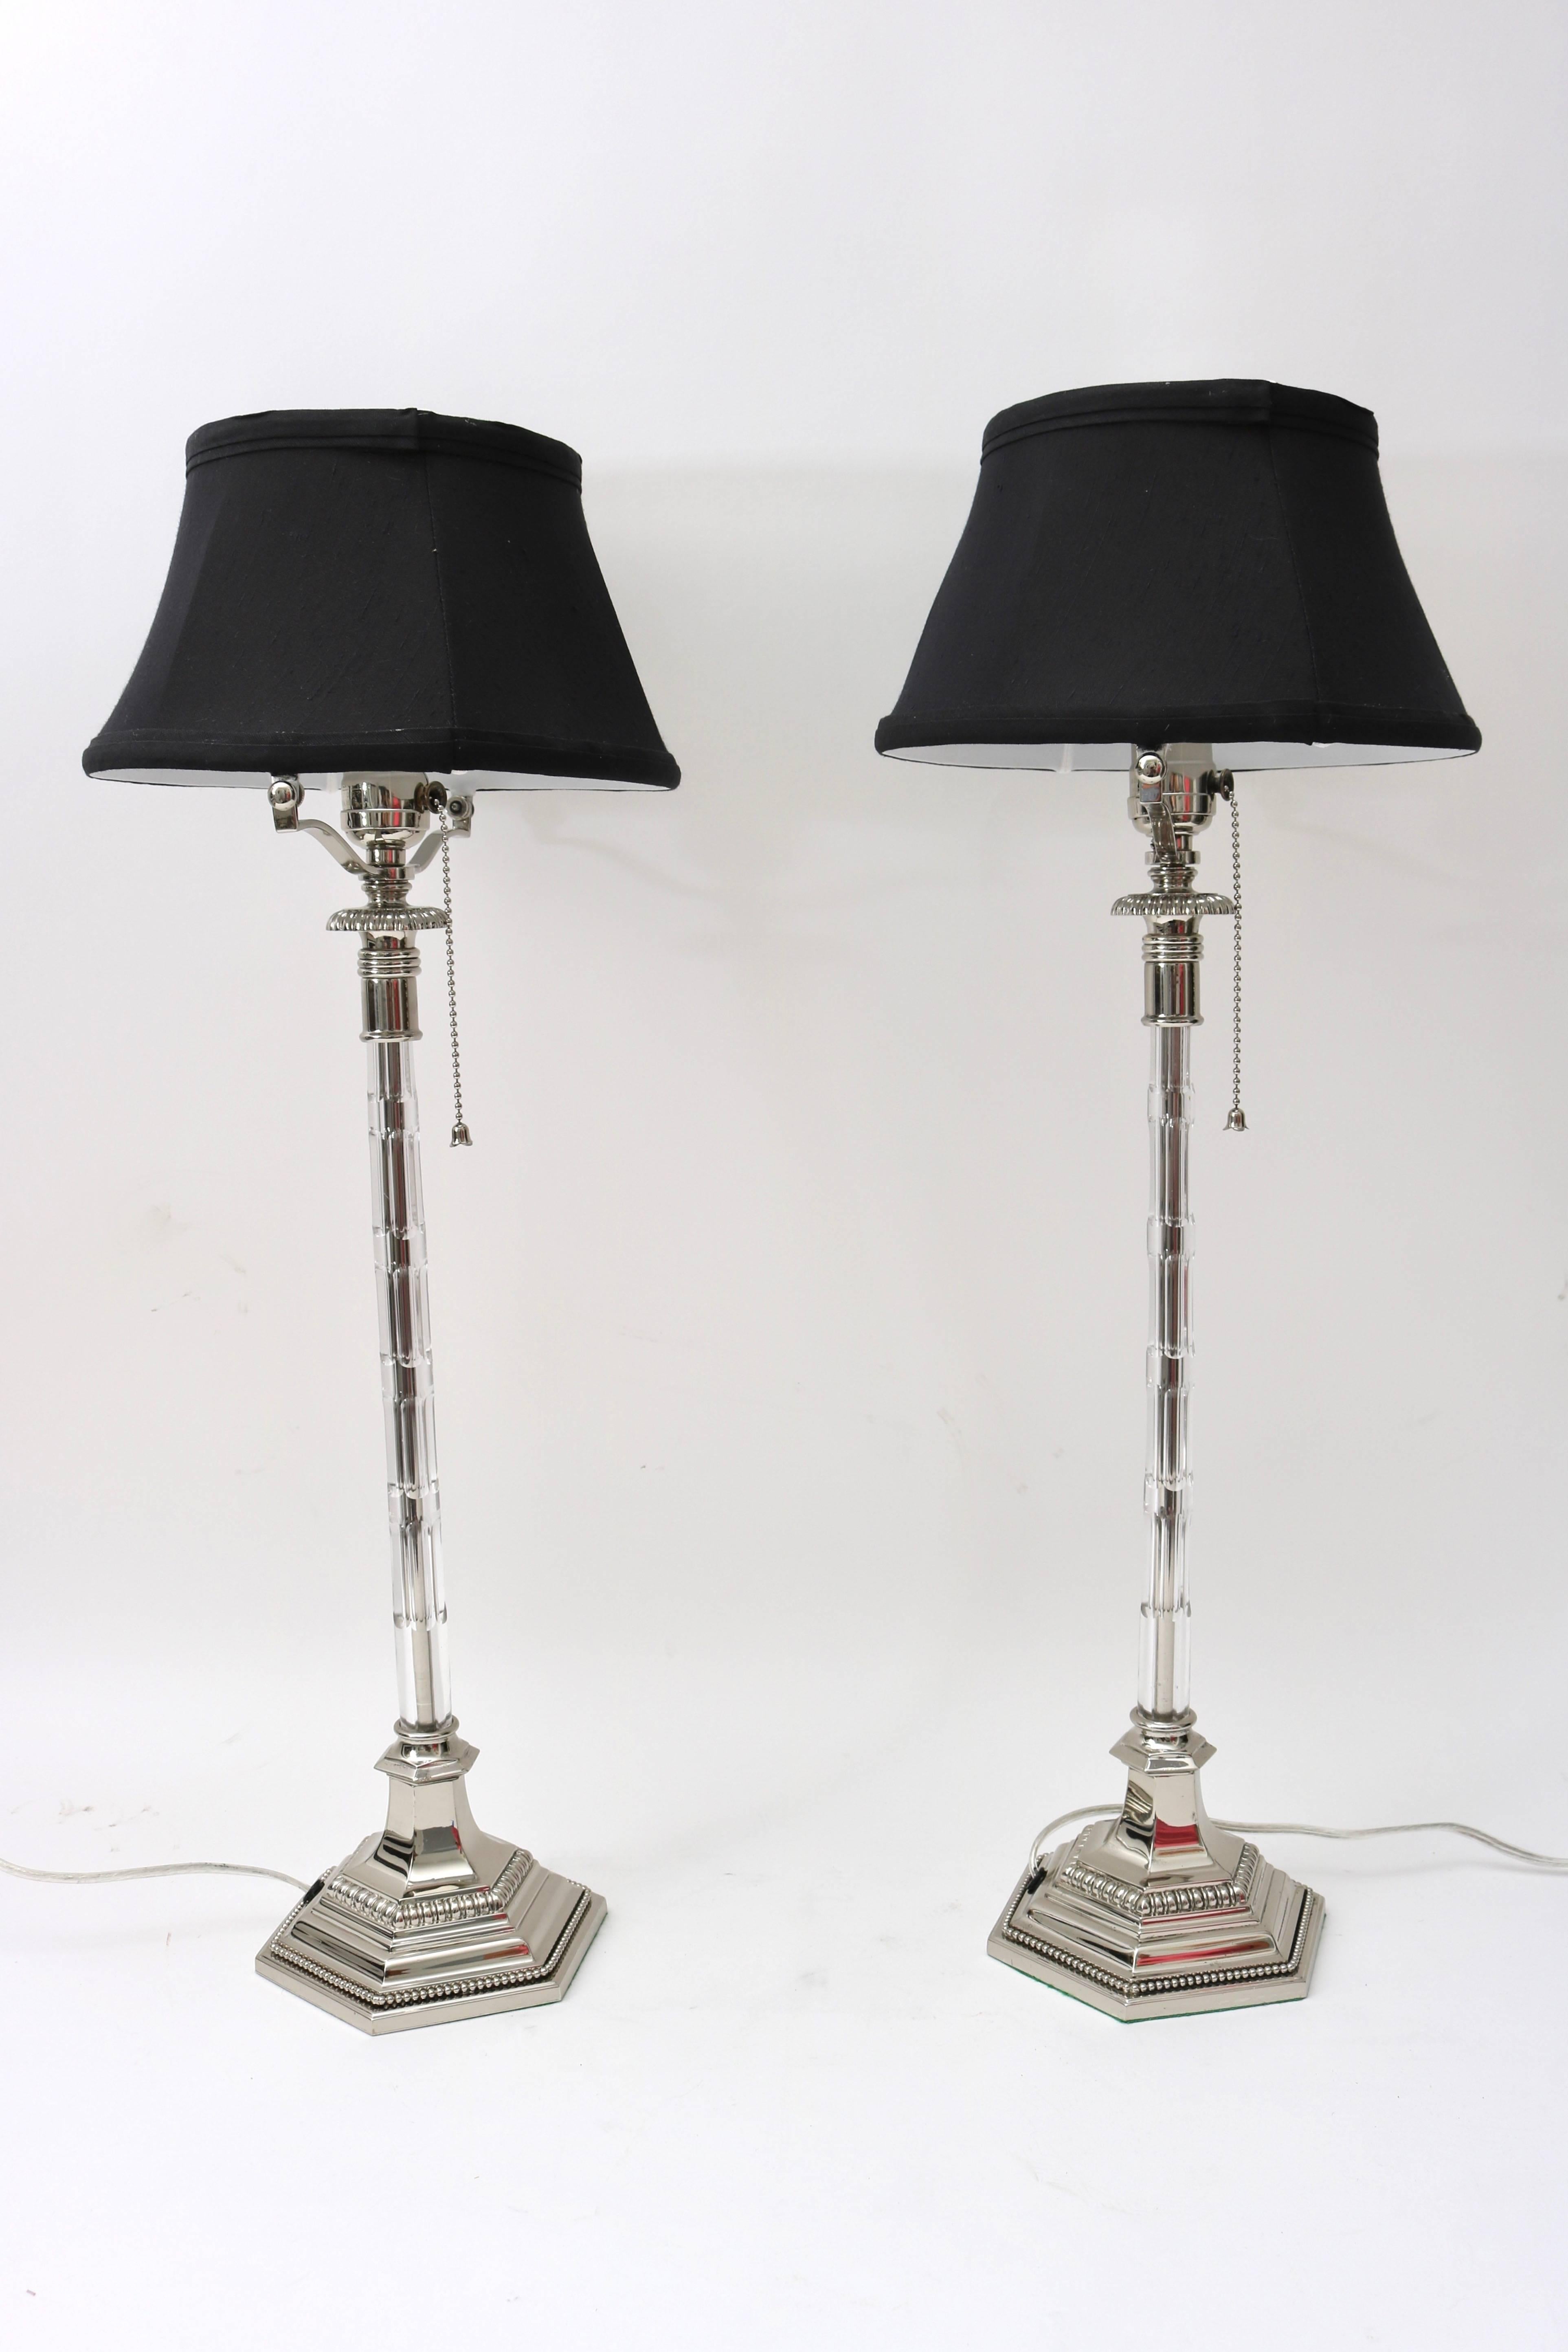 This stylish pair of Art Deco vanity lamps have recently been restored with nickel plating, new wiring and a custom-made shade. The rare form and design are the height of glamour of the 1920s.

For best net trade price or additional questions